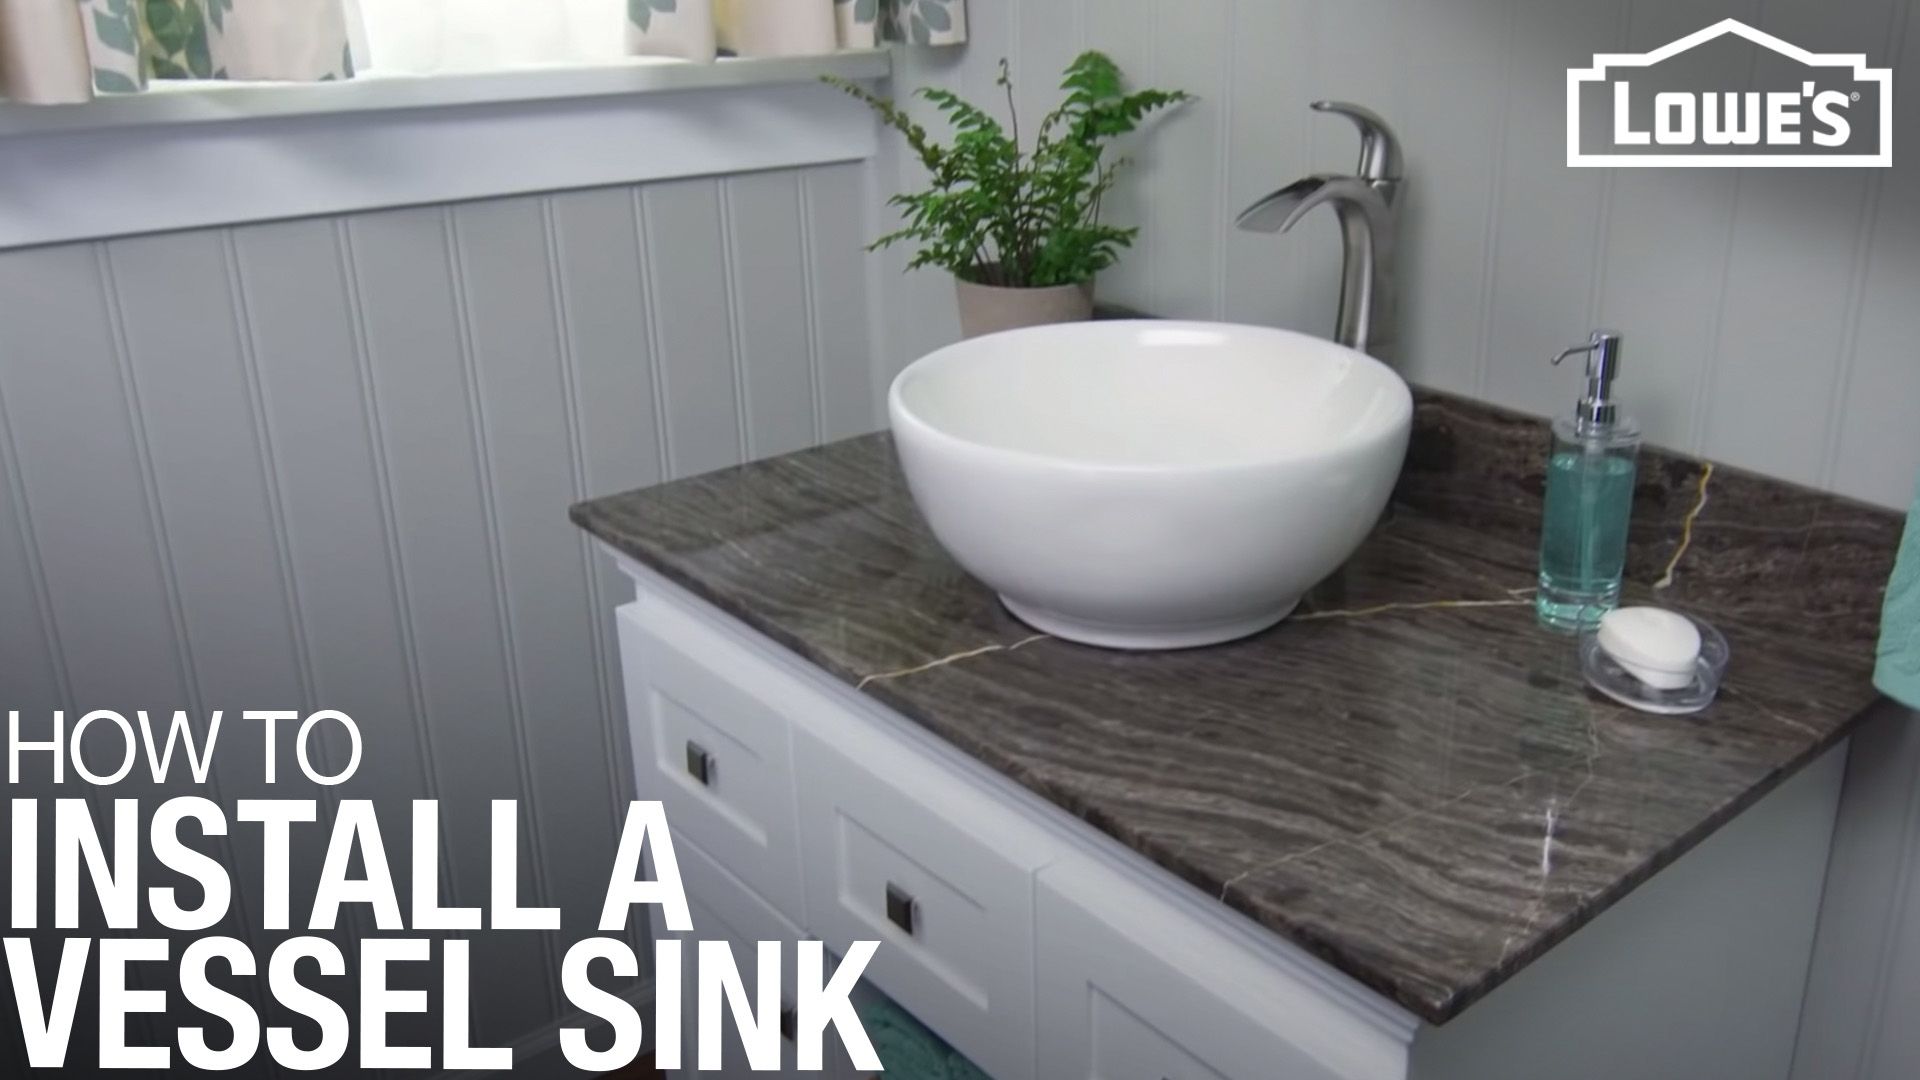 How To Install A Vessel Sink, How To Install A Vessel Sink Vanity